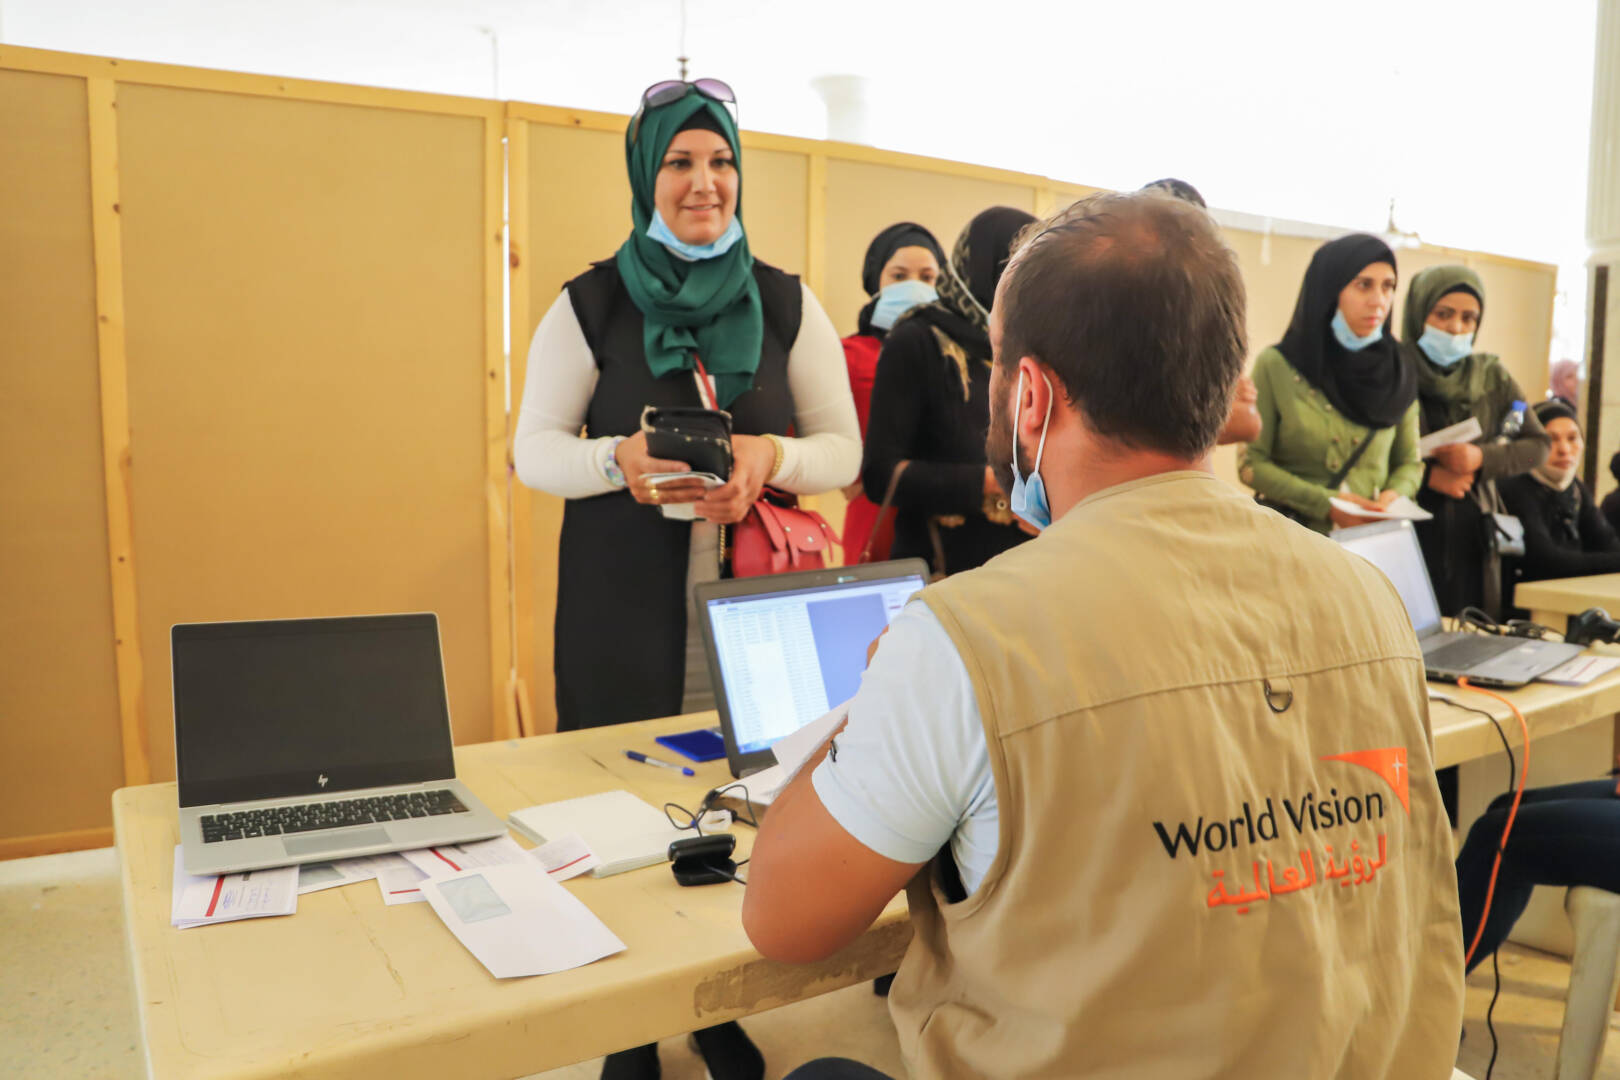 A man wearing a World Vision vest takes notes on a computer while a woman standing across the table from him speaks.